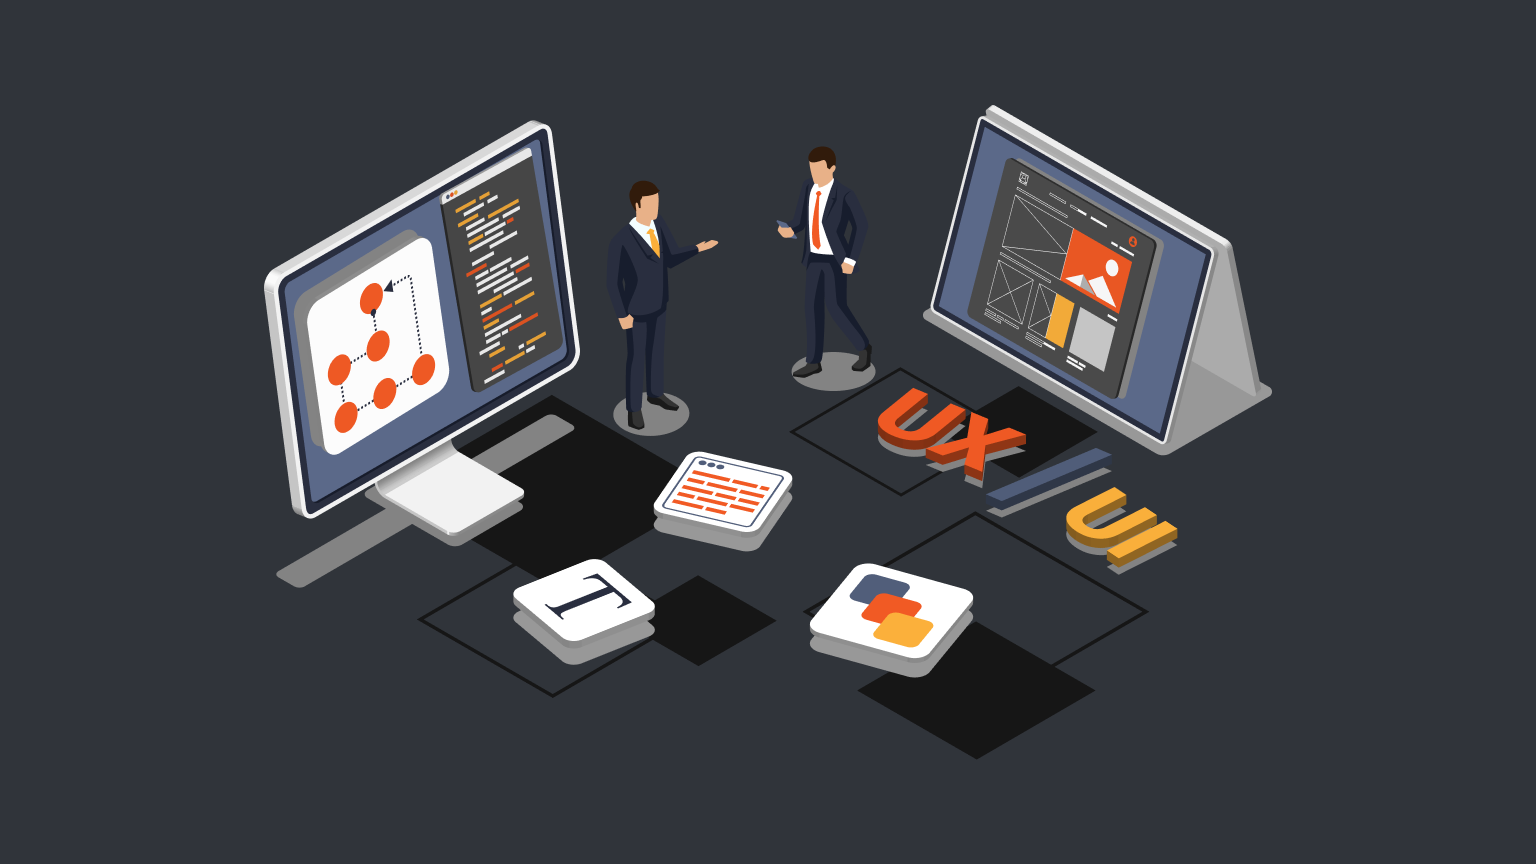 What are the 5 key concepts of user experience design?